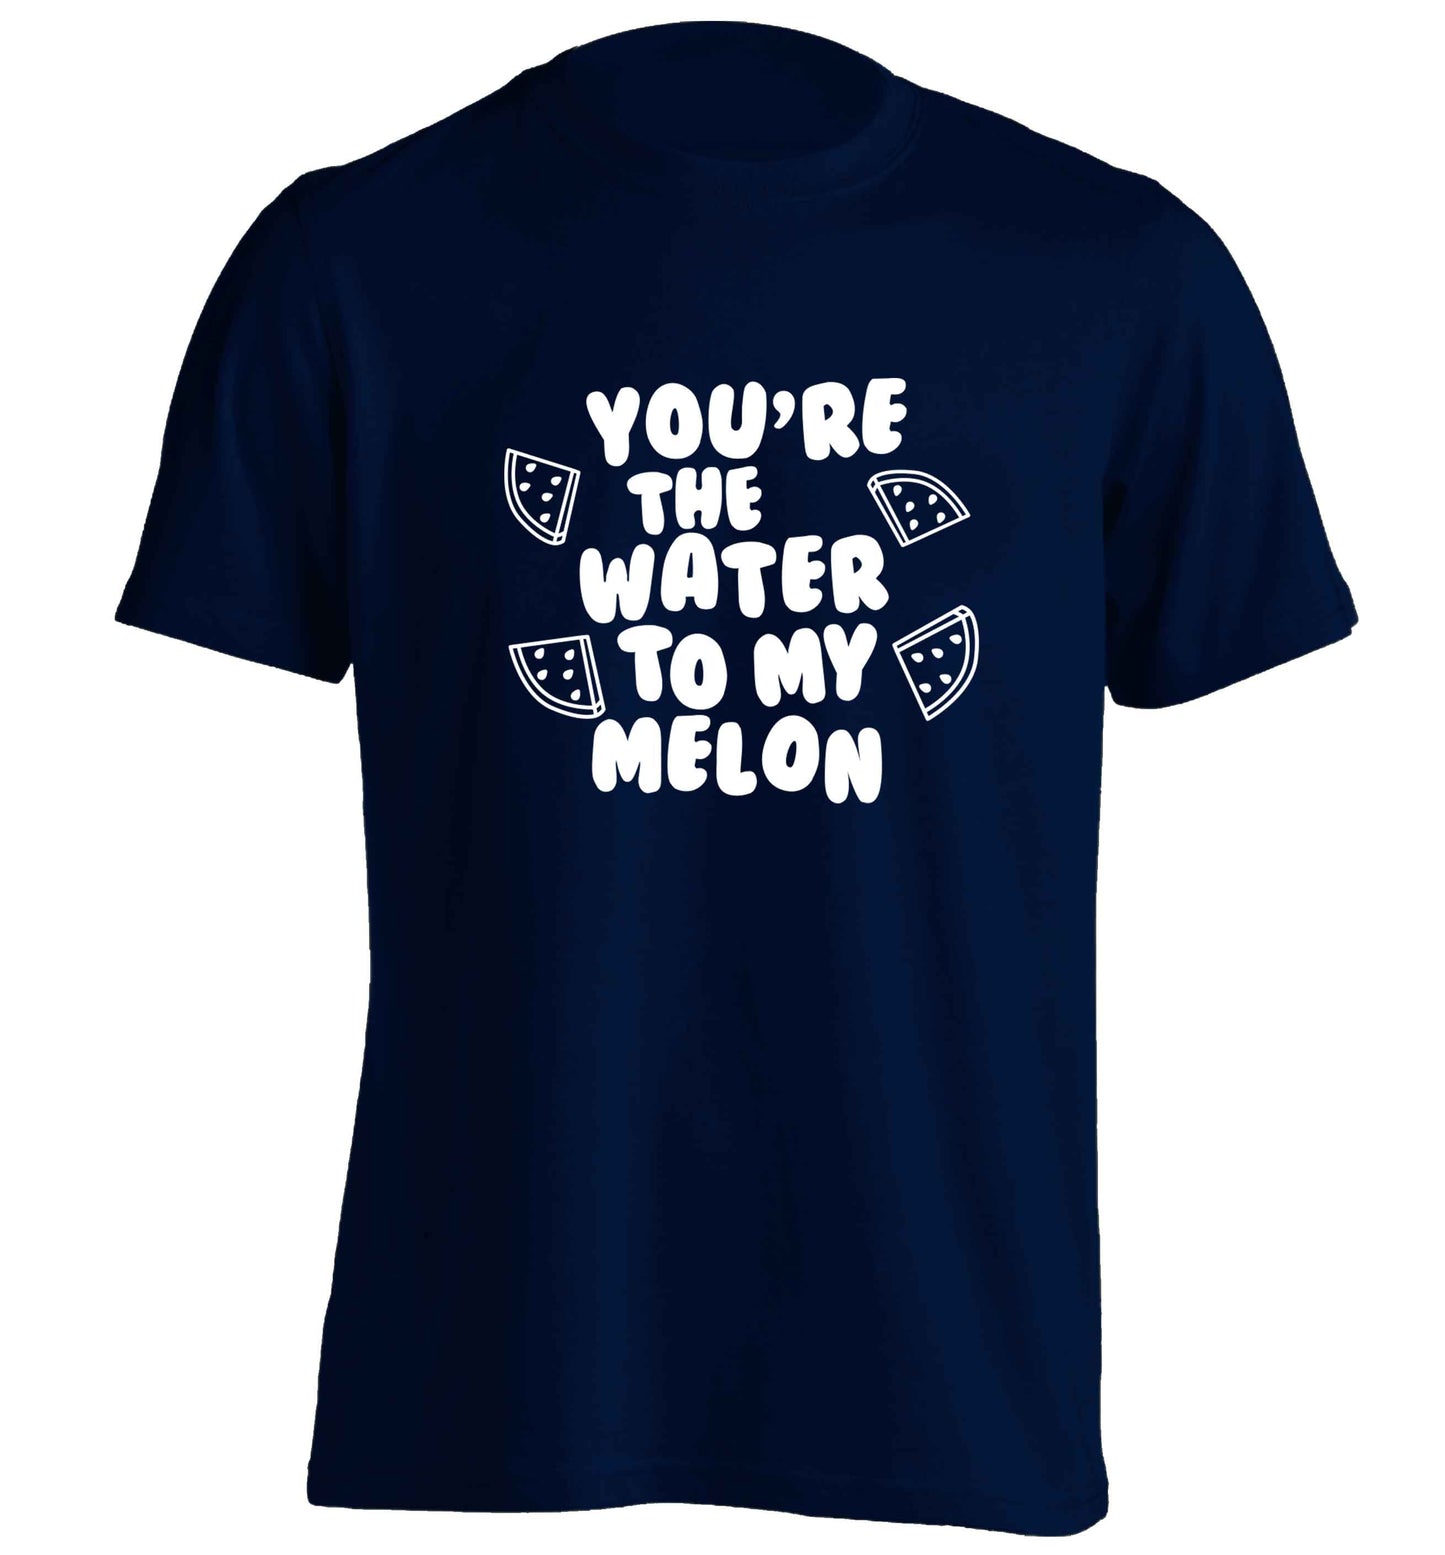 You're the water to my melon adults unisex navy Tshirt 2XL